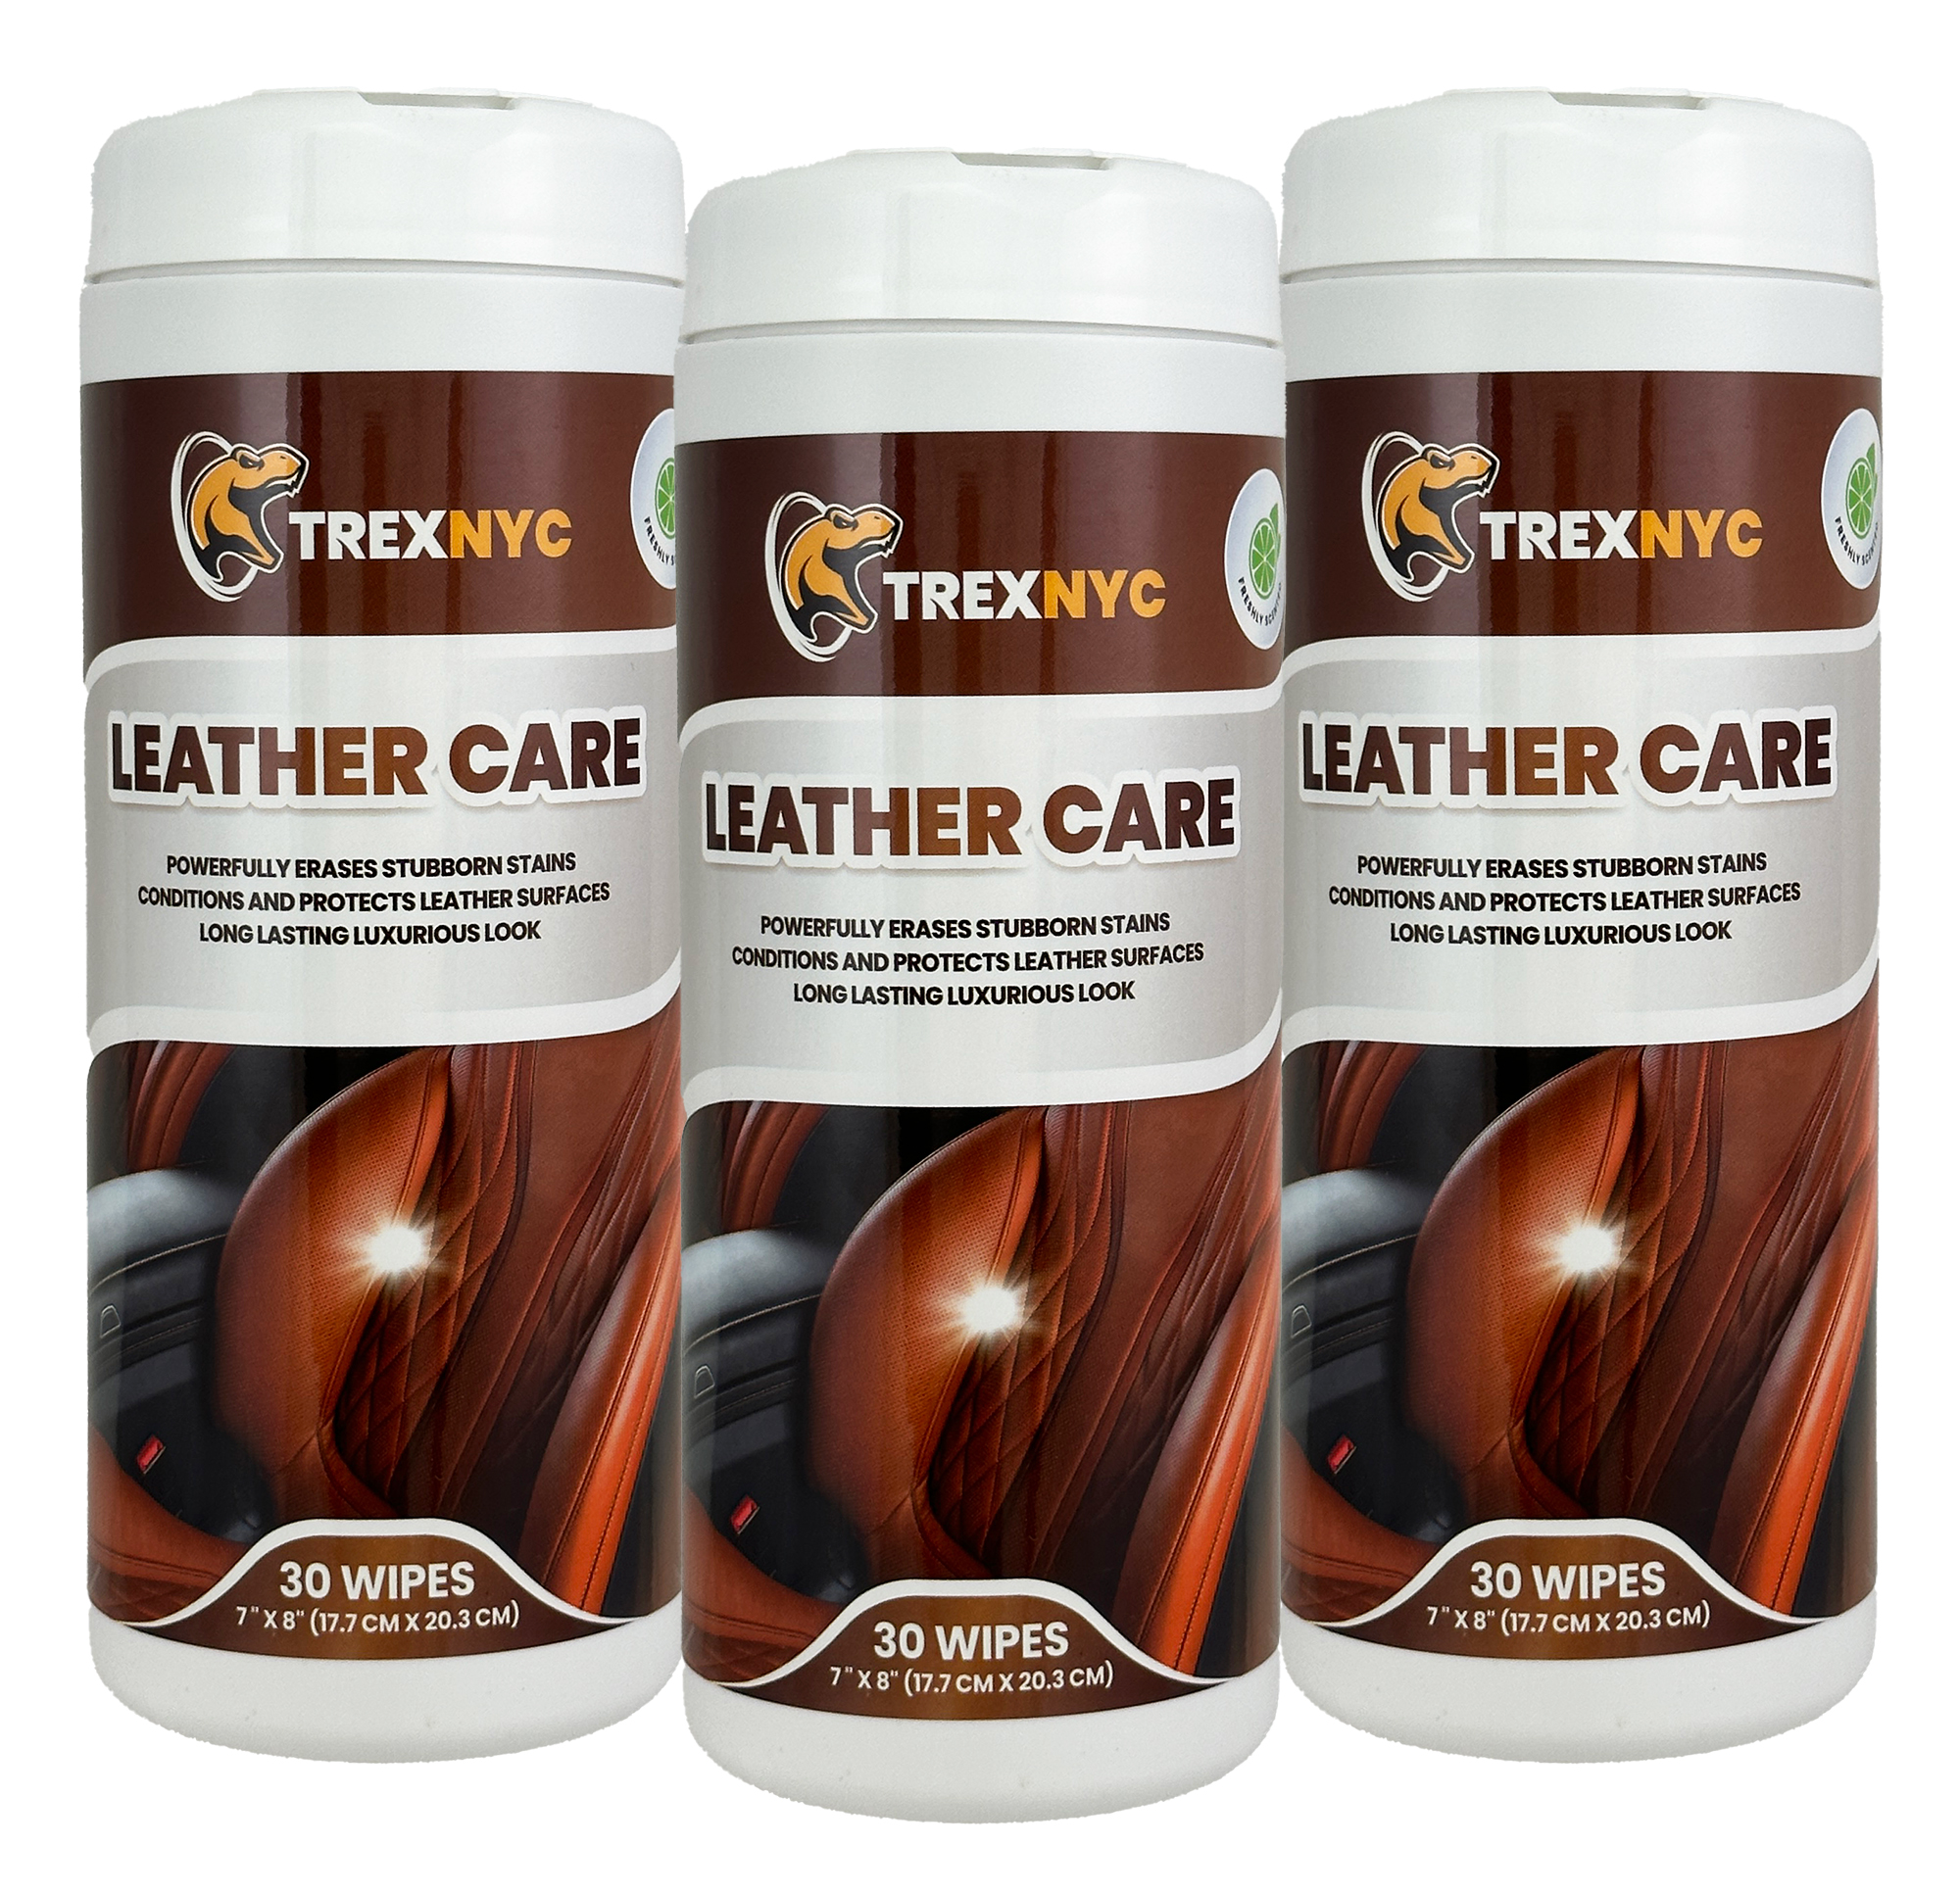 TrexNYC Leather Care Wipes for Car Seats, Leather Cleaning Wipes, Leather Car Seat Cleaner, Leather Wipes for Couch, Car Interior, Furniture, Shoes, A